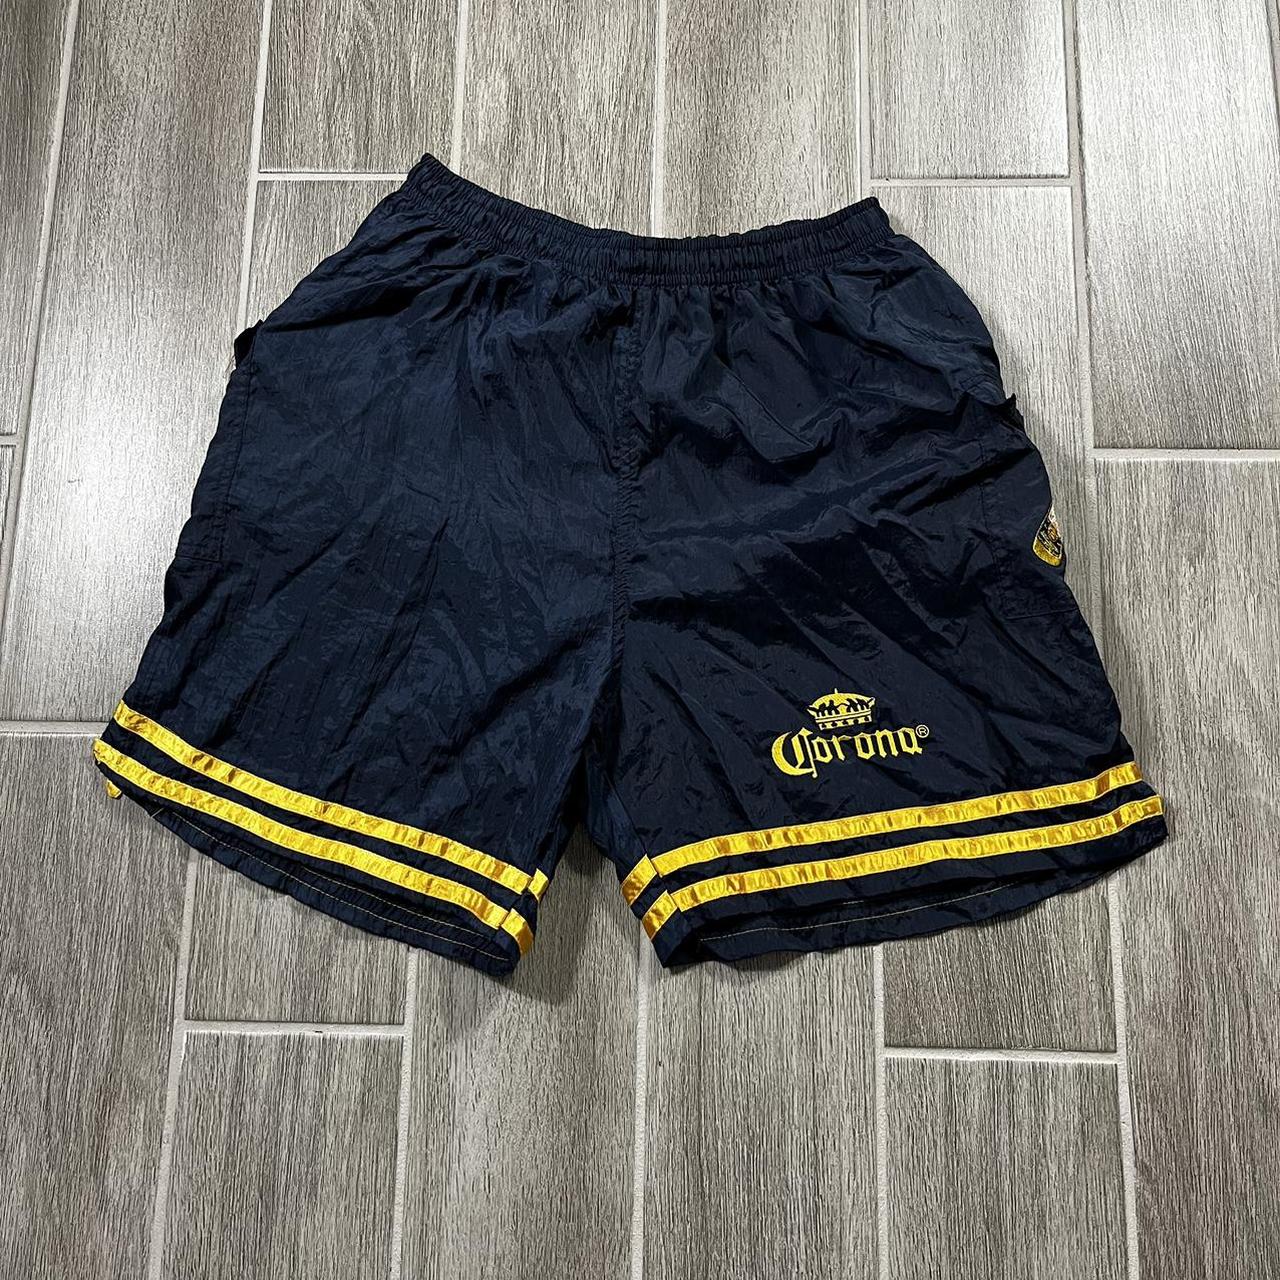 Men's Blue and Yellow Shorts | Depop